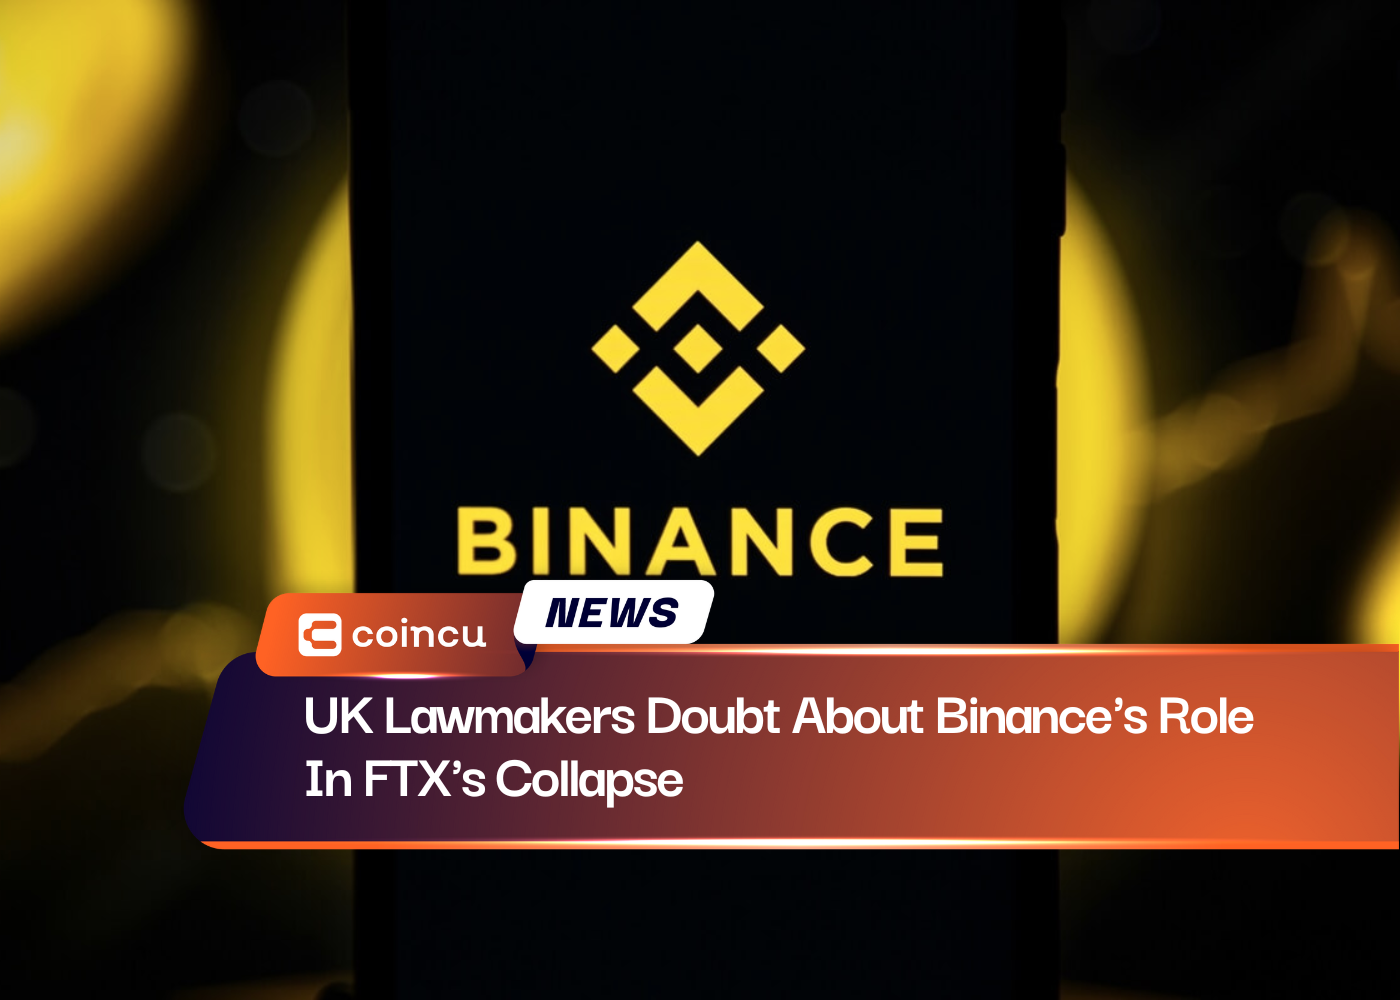 UK Lawmakers Doubt About Binance's Role In FTX's Collapse